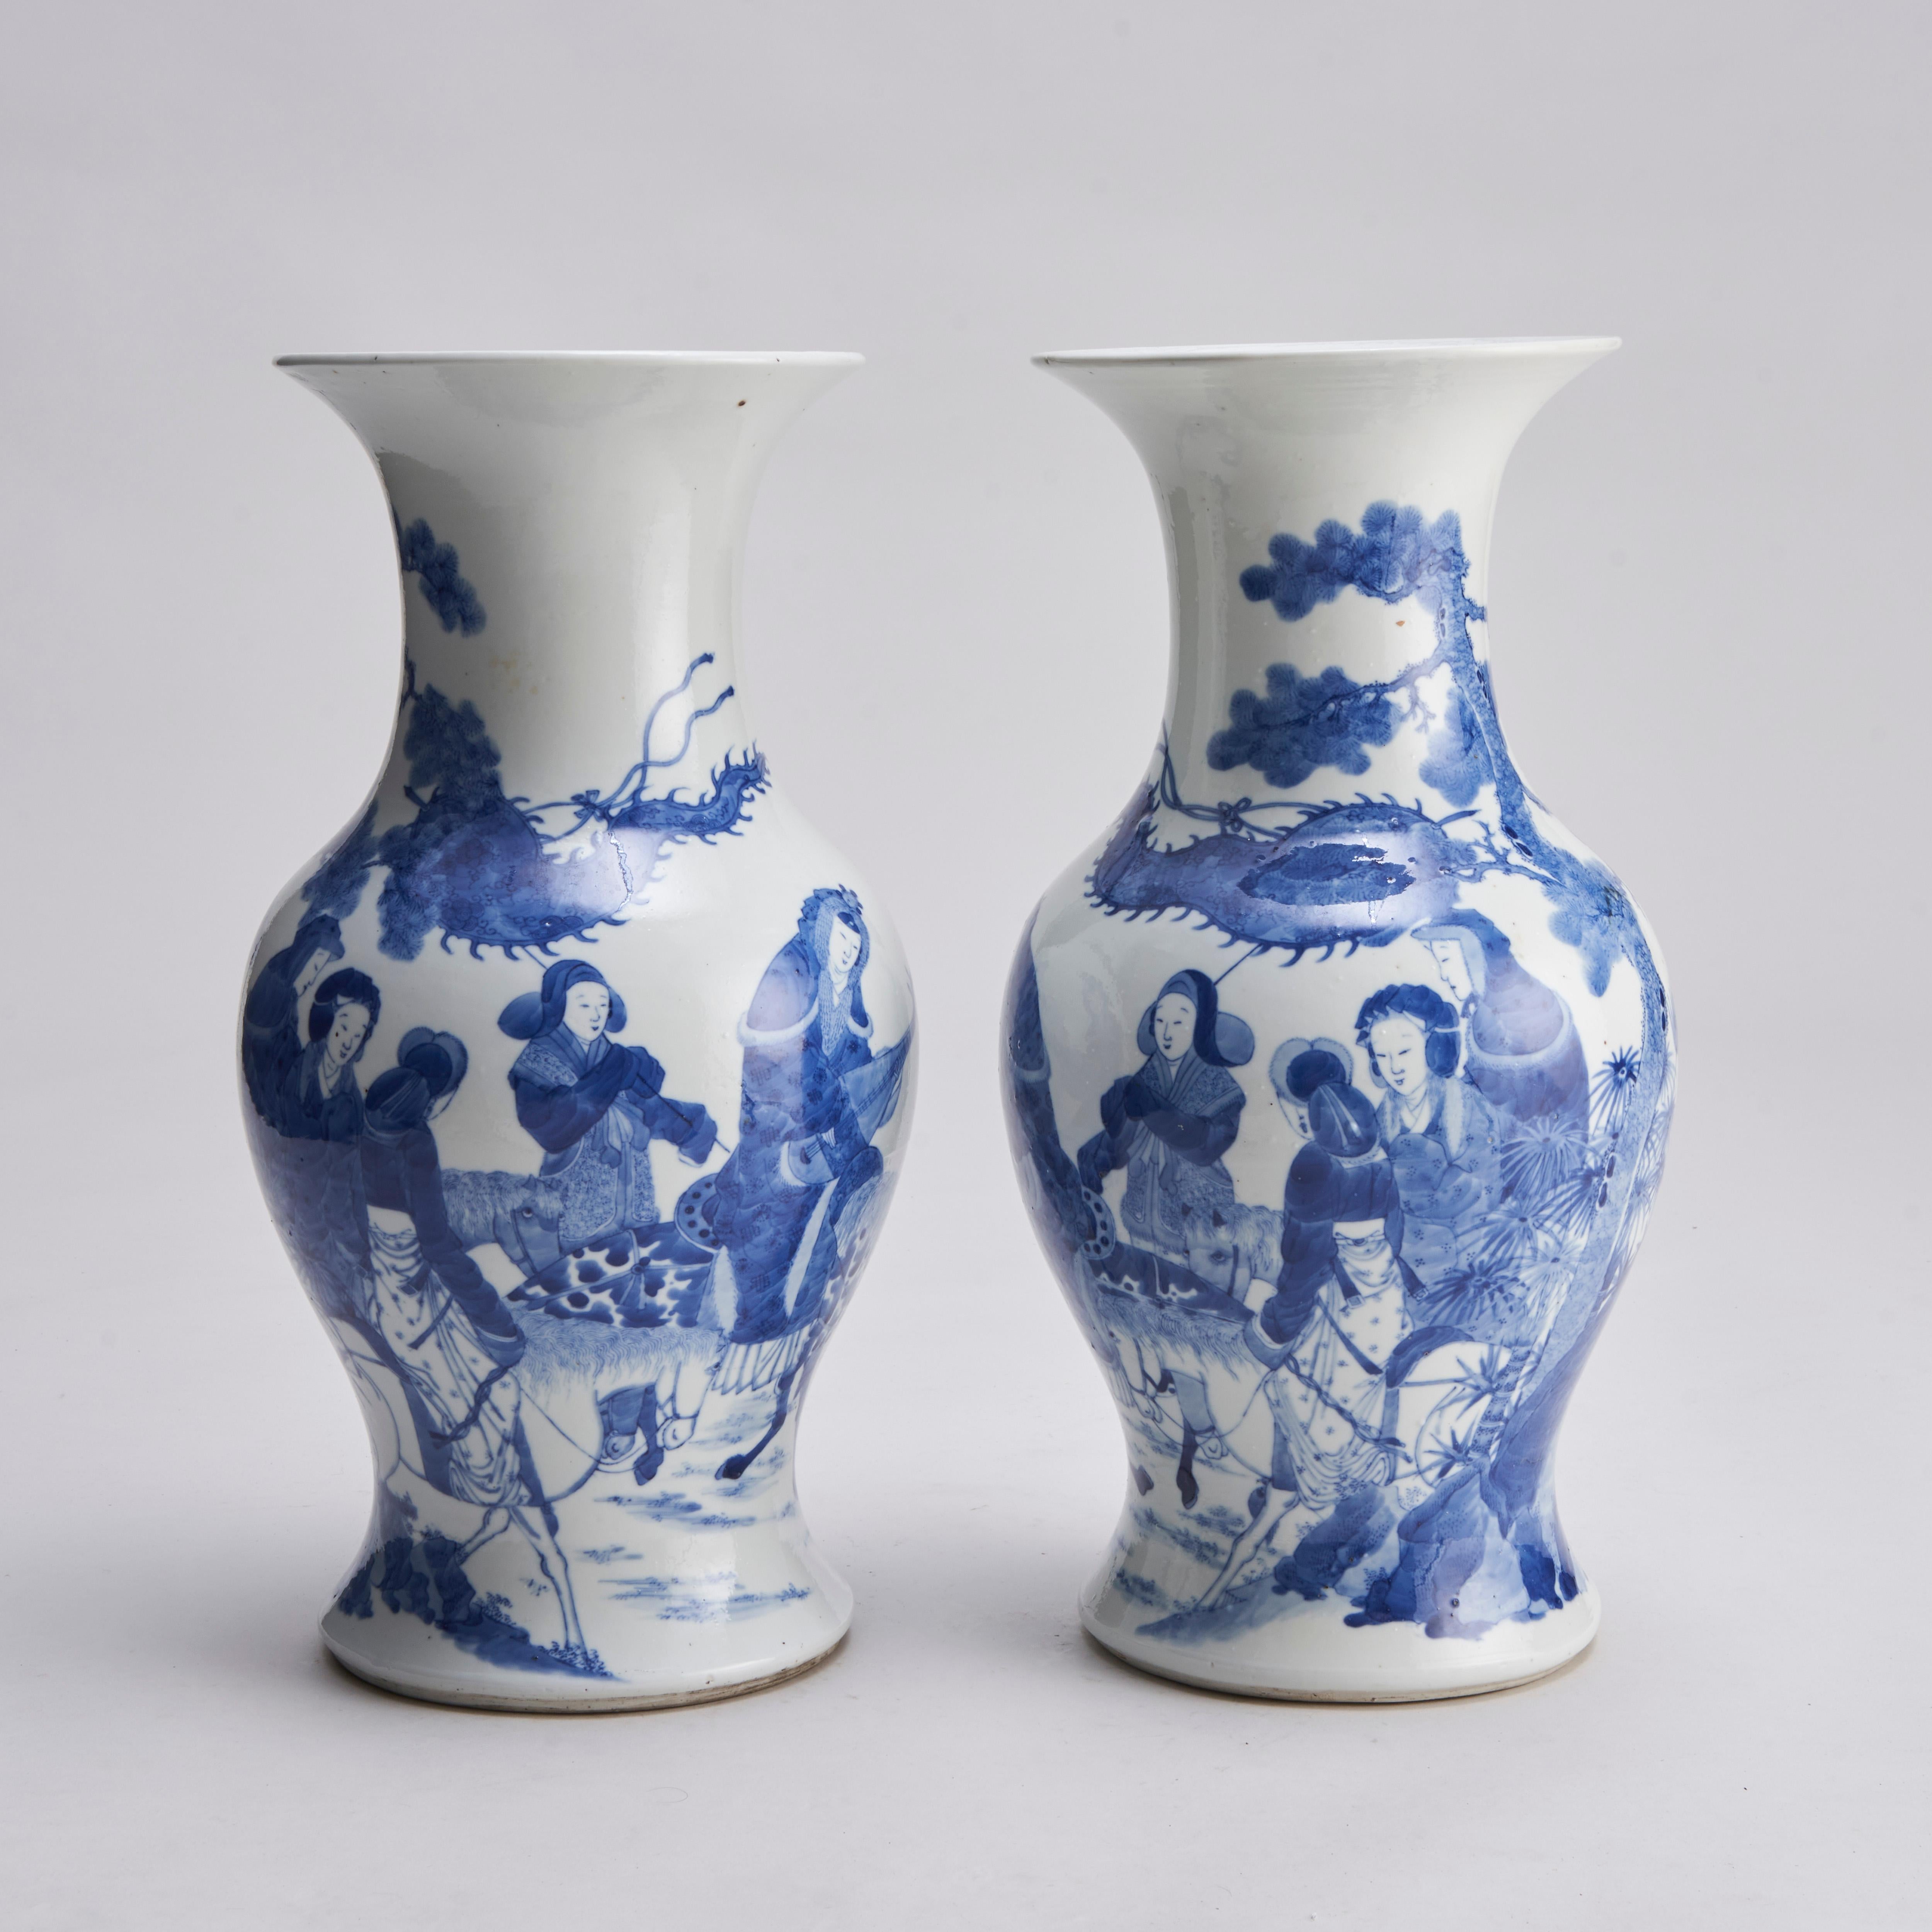 Porcelain A large, elegant pair of Chinese Blue and White vases For Sale